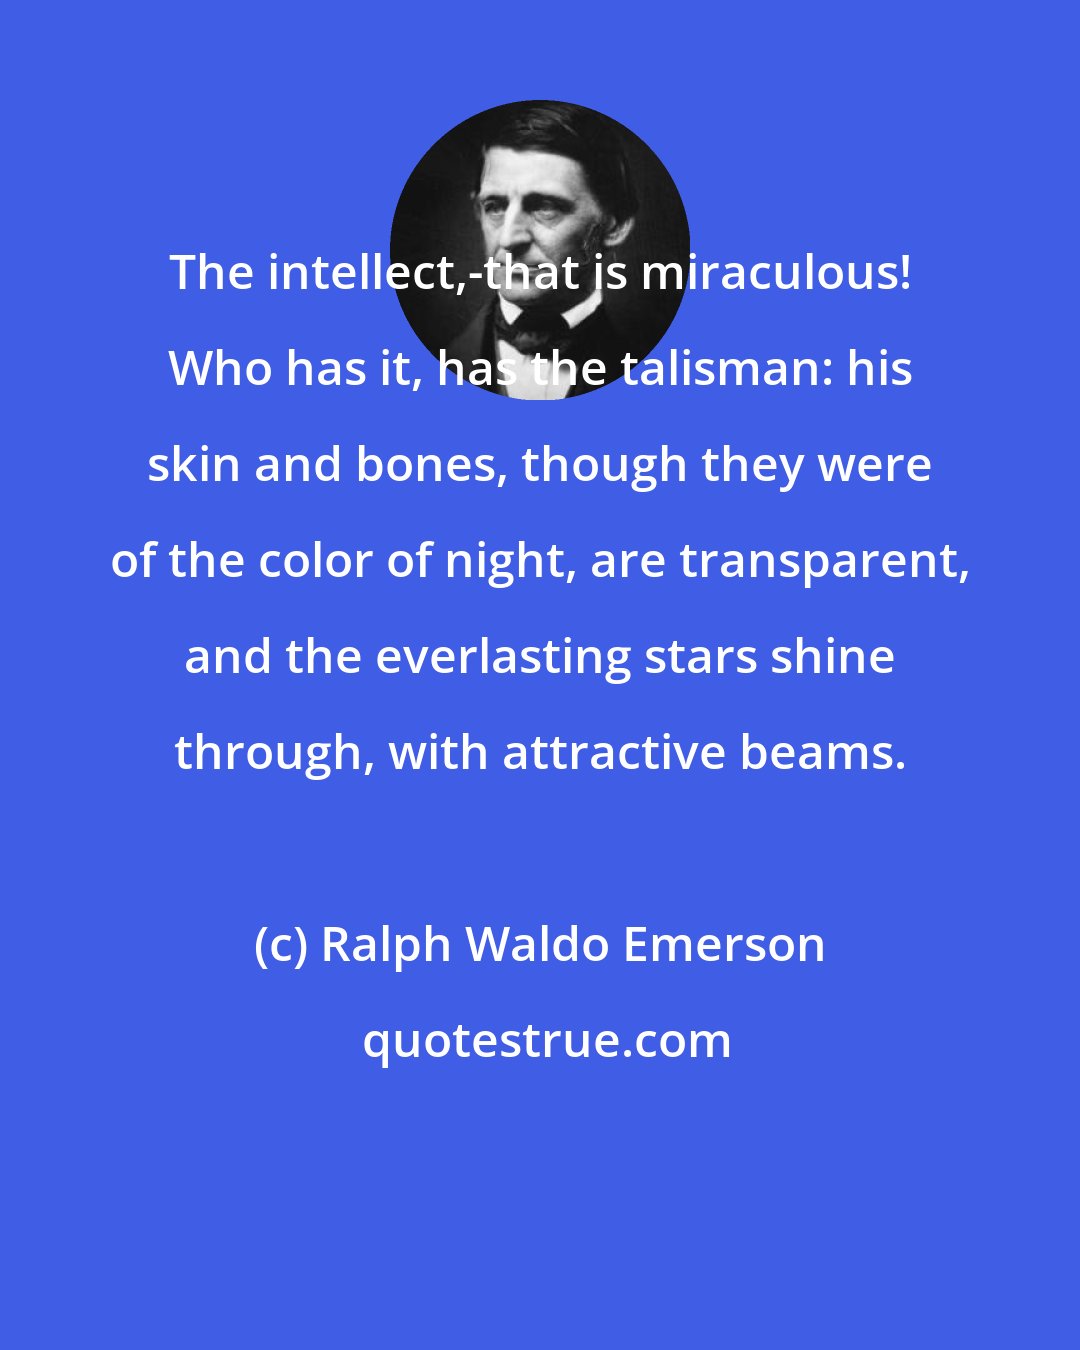 Ralph Waldo Emerson: The intellect,-that is miraculous! Who has it, has the talisman: his skin and bones, though they were of the color of night, are transparent, and the everlasting stars shine through, with attractive beams.